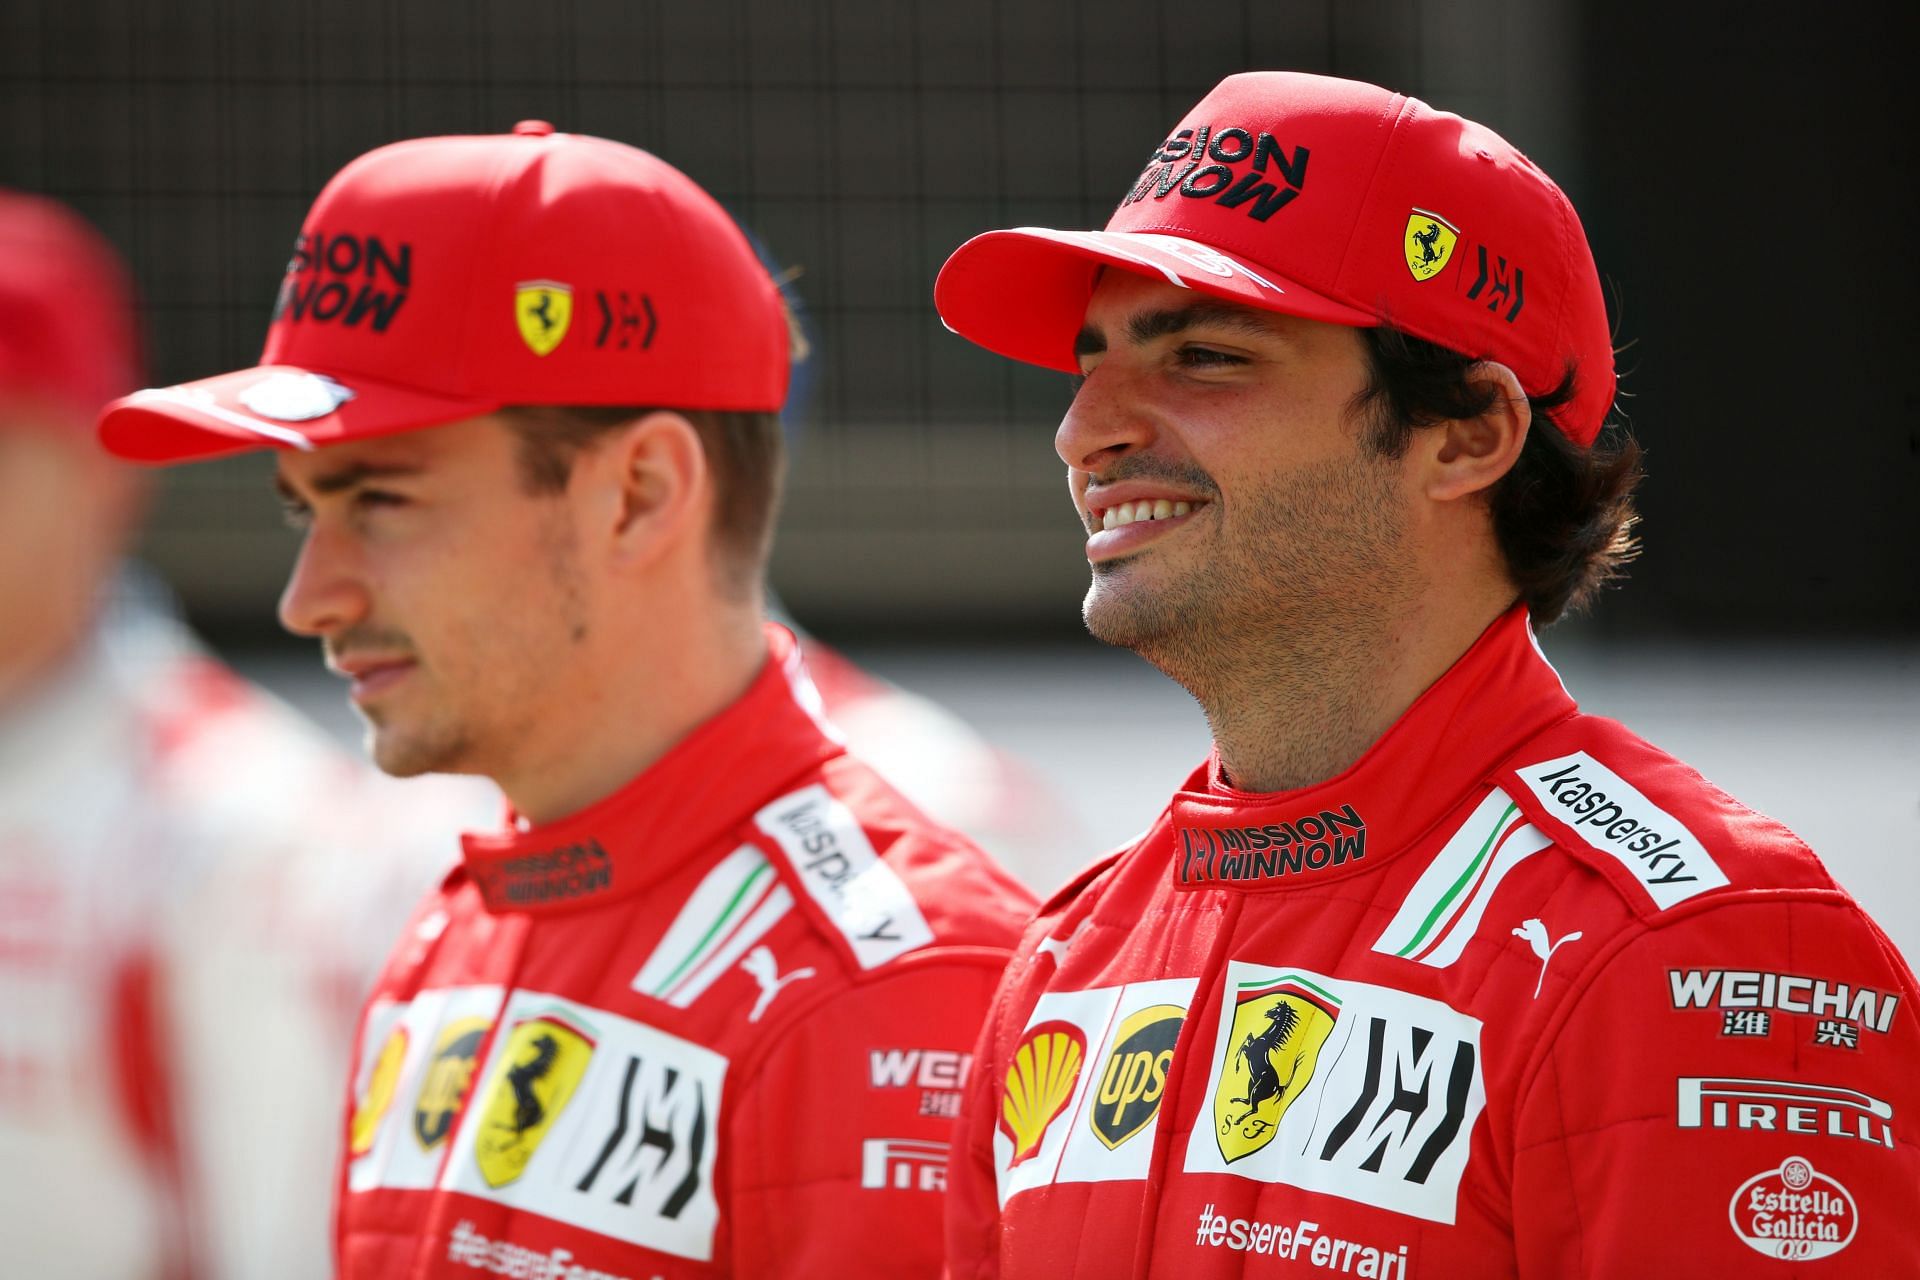 Charles Leclerc (left) and Carlos Sainz (right) during the 2021 F1 season (Photo by Joe Portlock/Getty Images)